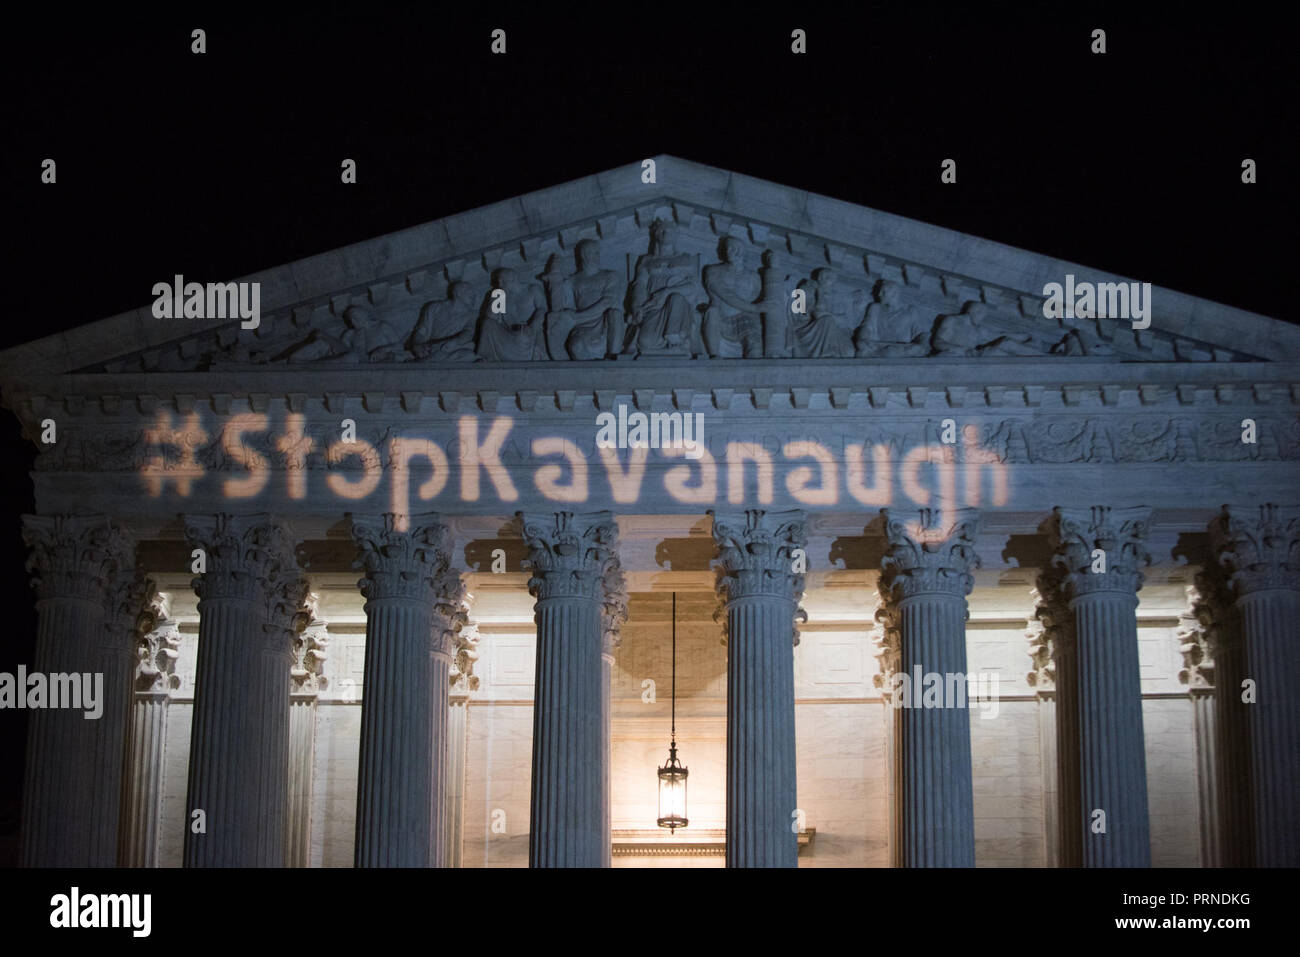 Washington DC, USA. October 3, 2018 - Stop Kavanaugh Rally at US Supreme Court.A light projection briefly shows ''#StopKavanaugh'' on the ediface of the US Supreme Court. It was quickly shut down by police. Zach D Roberts.Washington DC.USA.NEW.20181004 (Credit Image: © Zach RobertsZUMA Wire) Credit: ZUMA Press, Inc./Alamy Live News Stock Photo